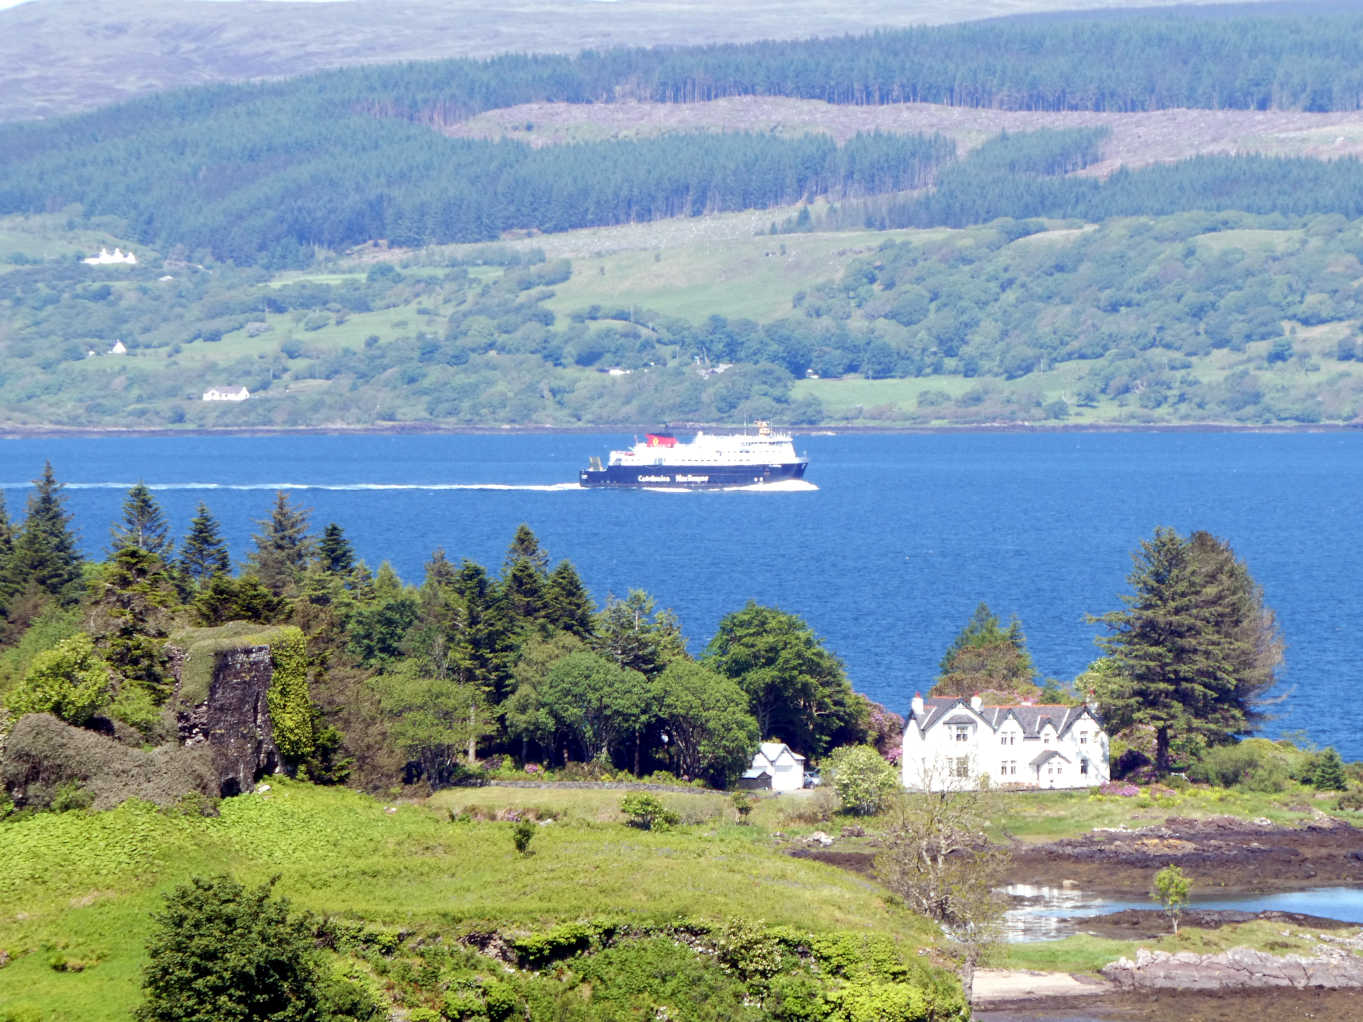 Aros castle and the sound of Mull